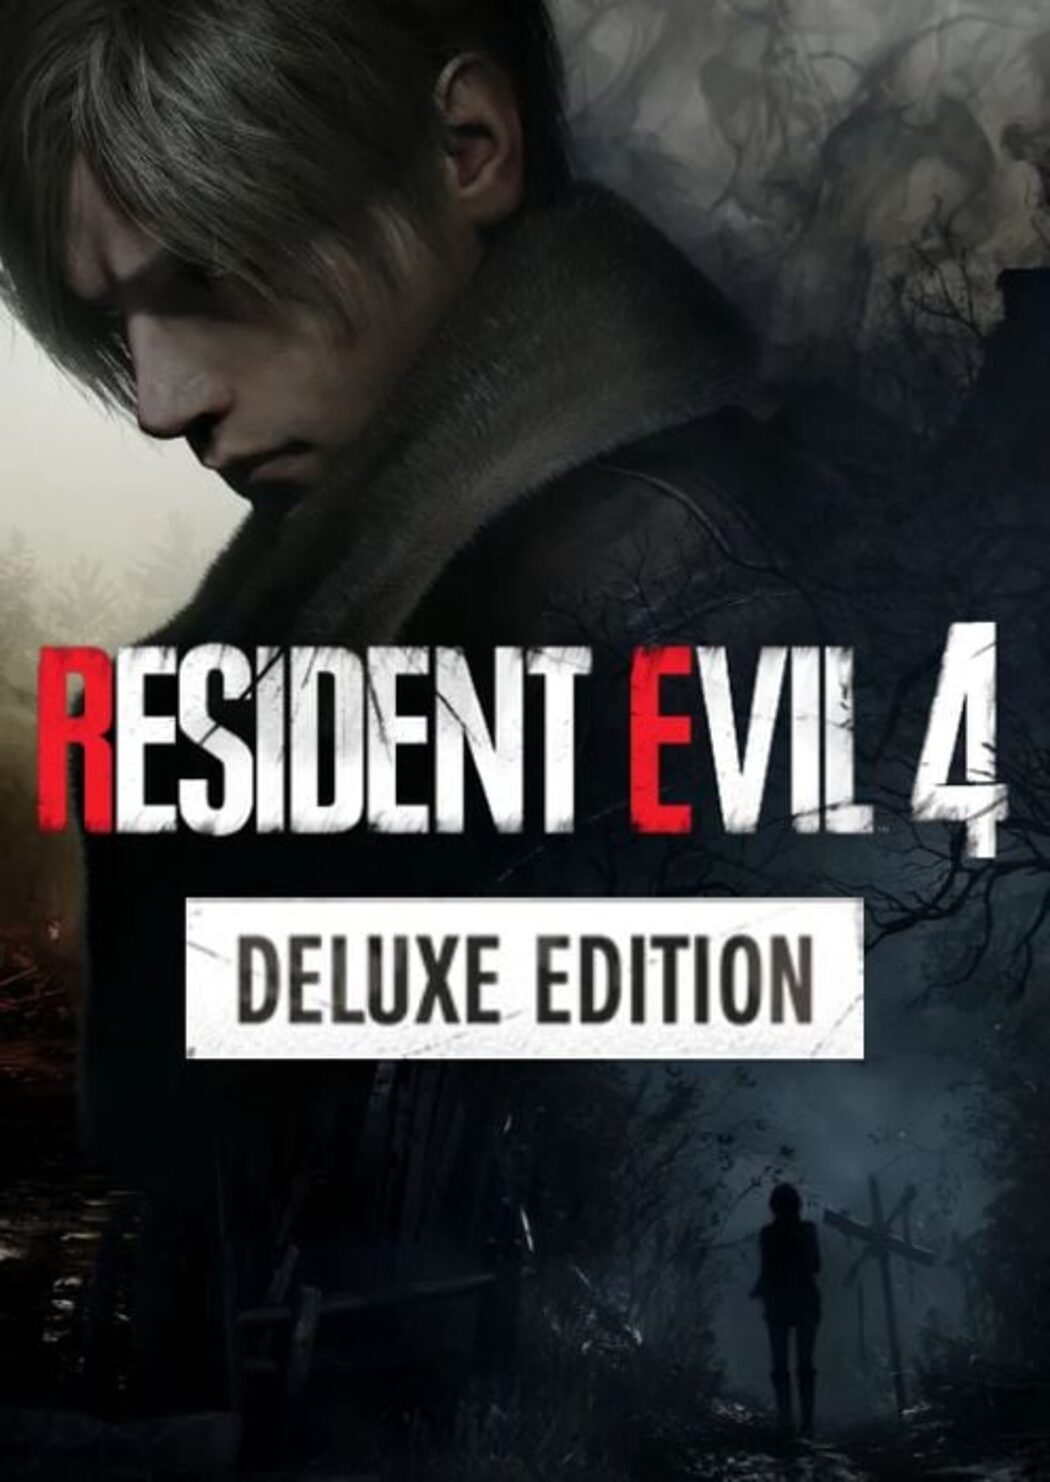 Resident Evil 4 - Deluxe Edition - PC - Compre na Nuuvem